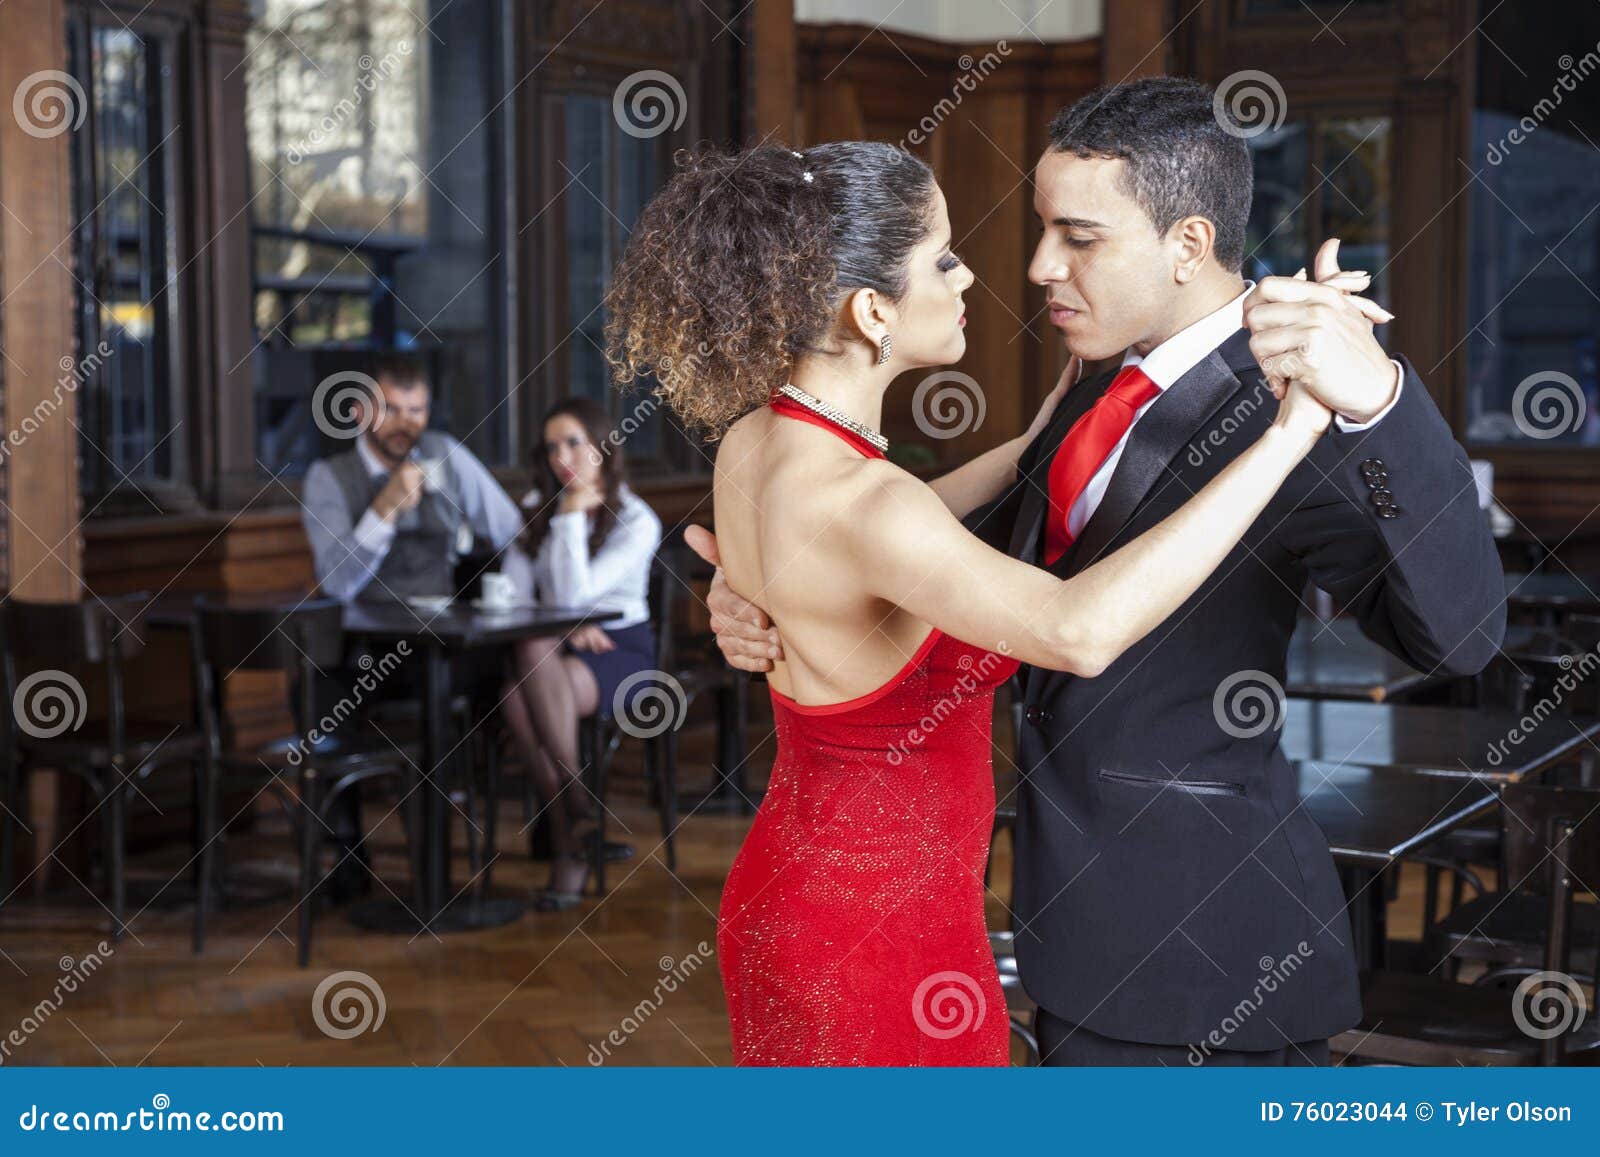 Dating Coworkers: What Happens When Ballet Dancers Date | HuffPost ...